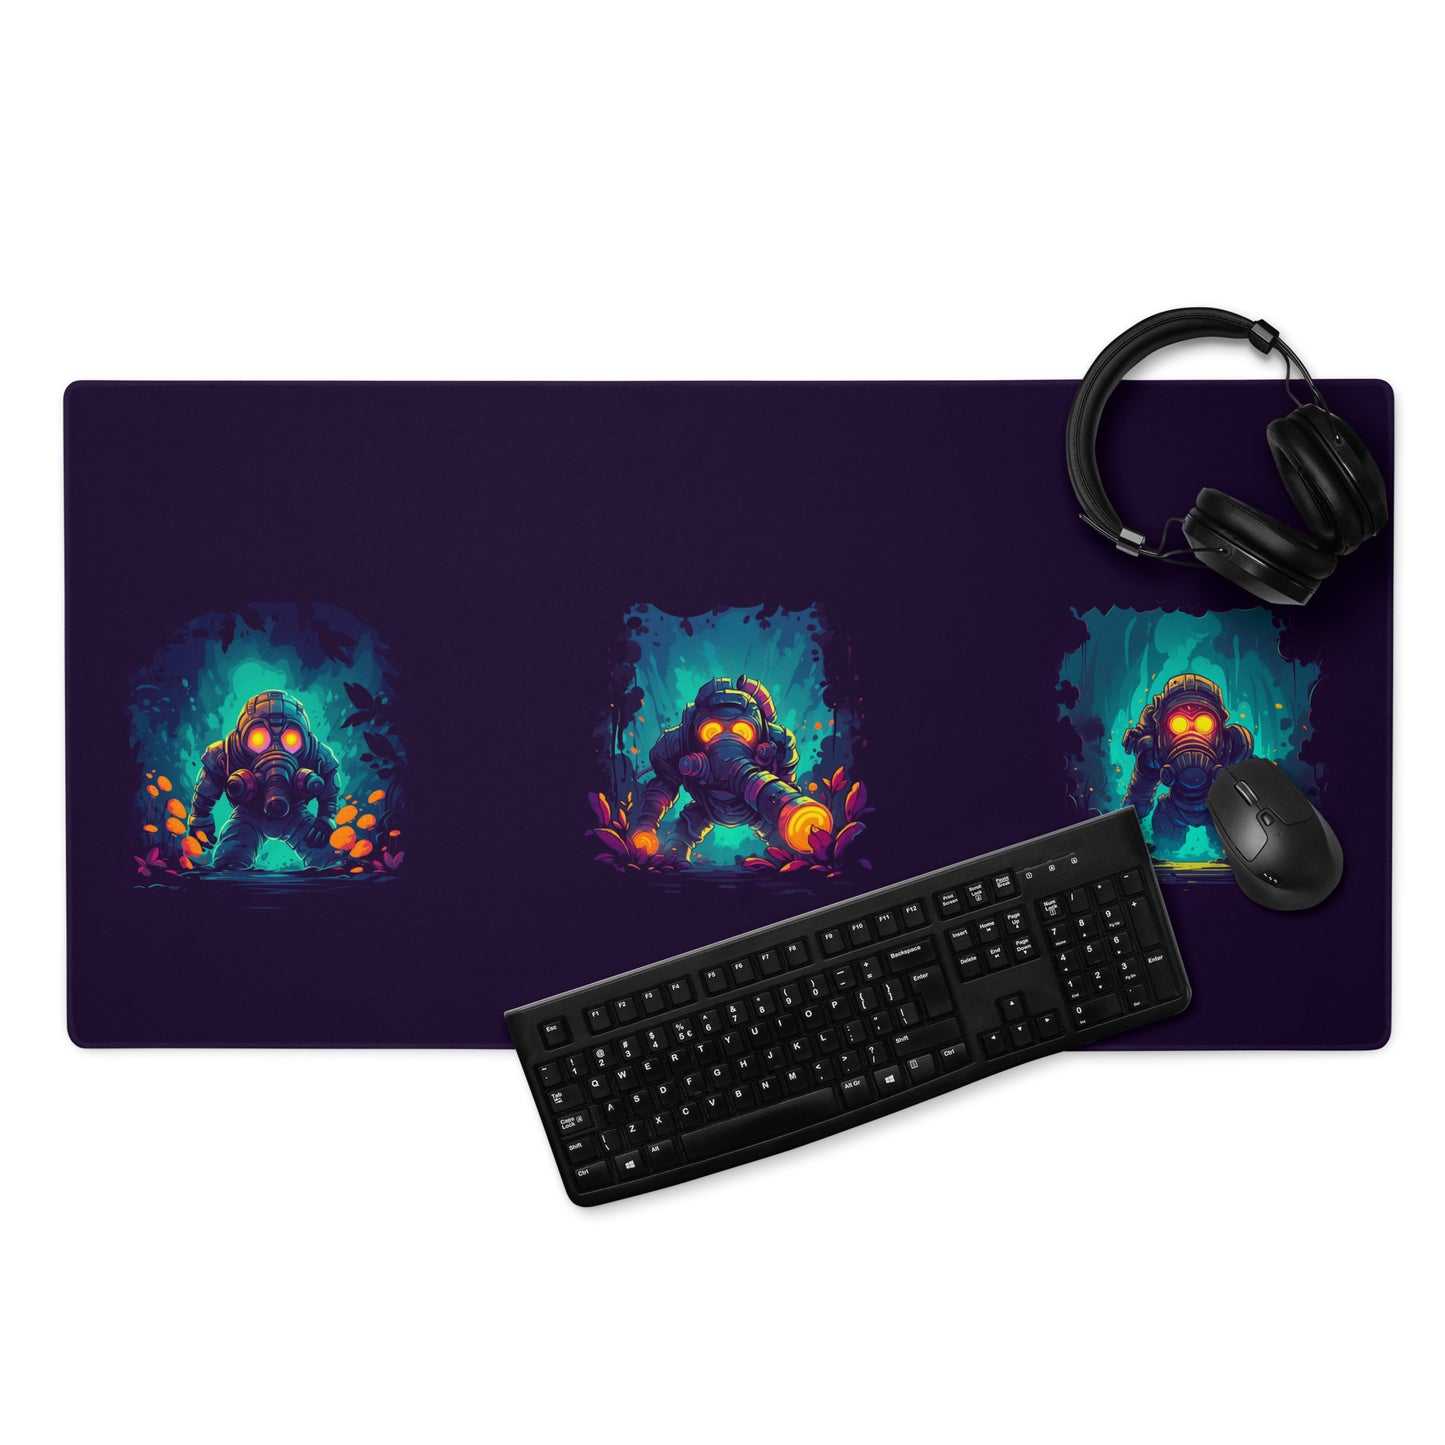 A 36" x 18" purple desk pad with three people with gas masks in a forest. With a keyboard, mouse, and headphones sitting on it.